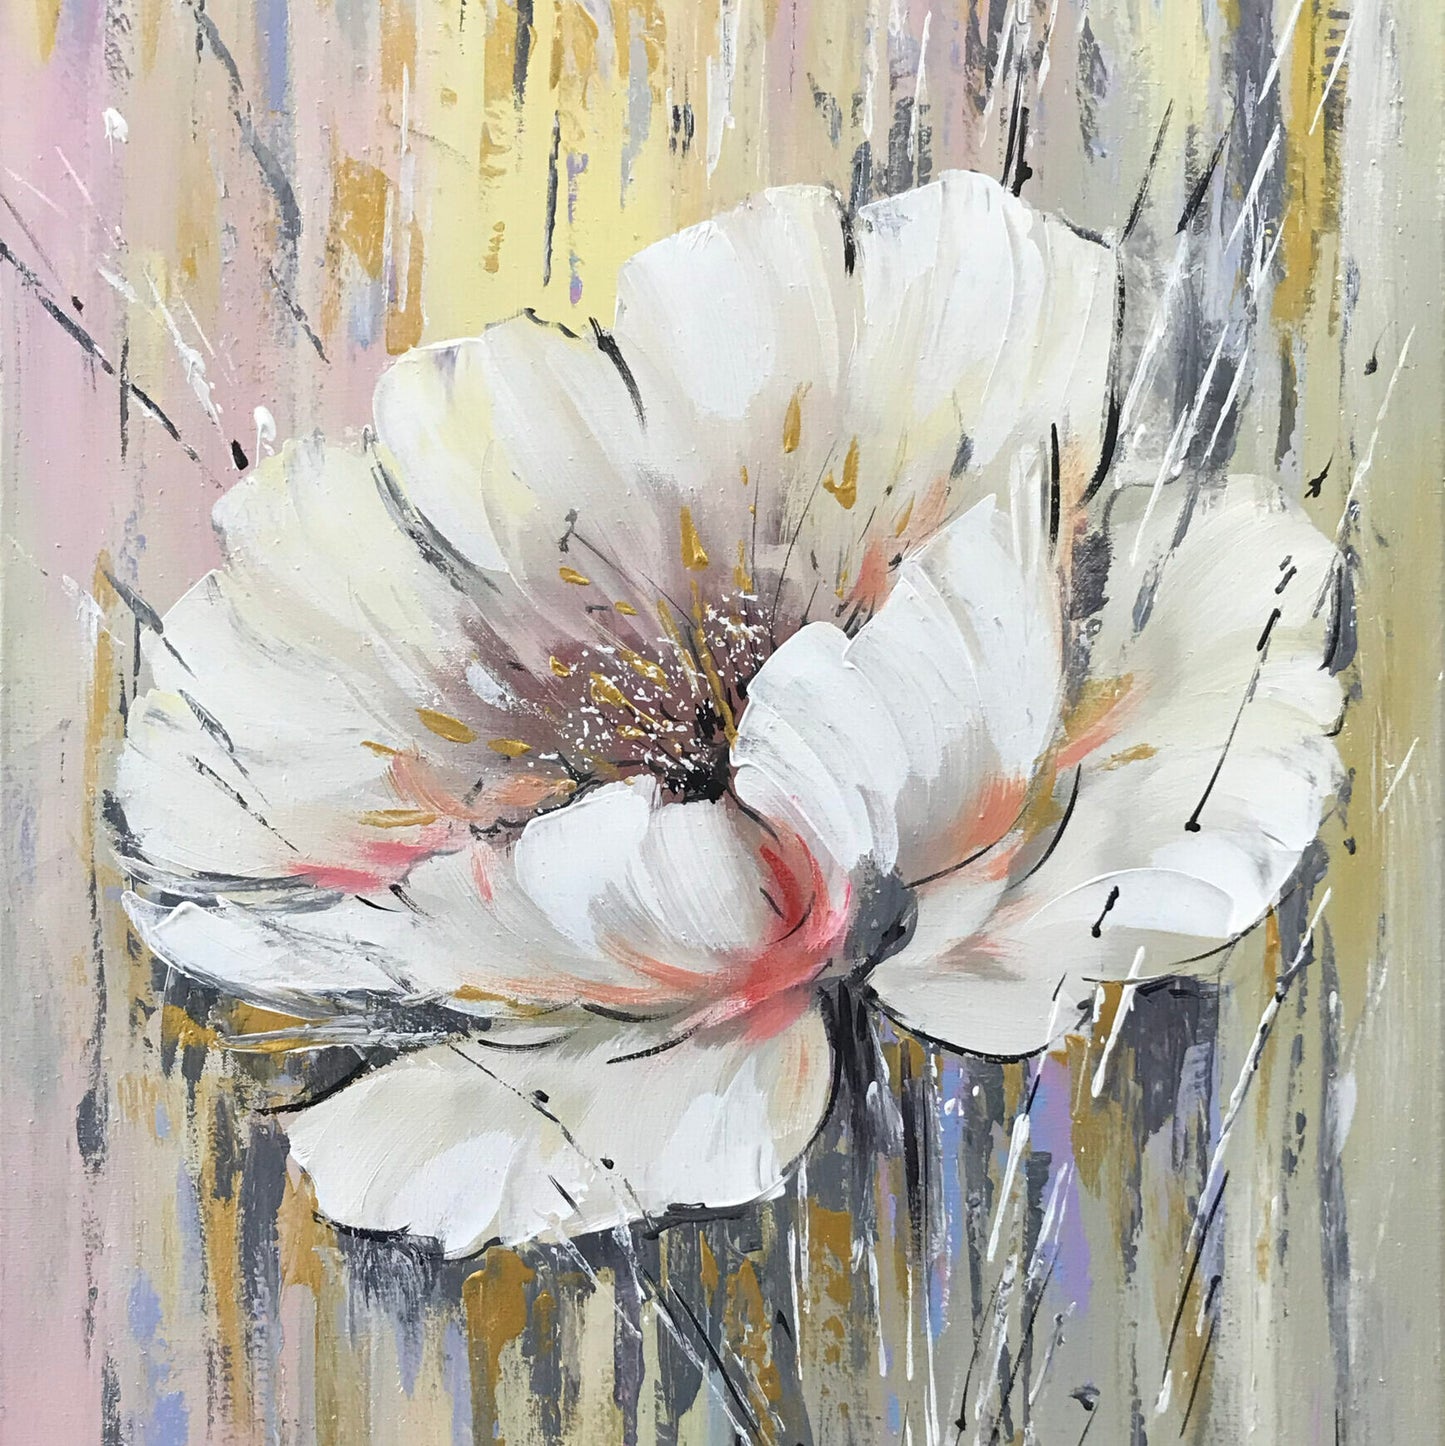 Large Abstract Flower Painting Gold White Floral Wall Decor Large Floral Oil Artwork Single White Flower Oil Painting Original Art